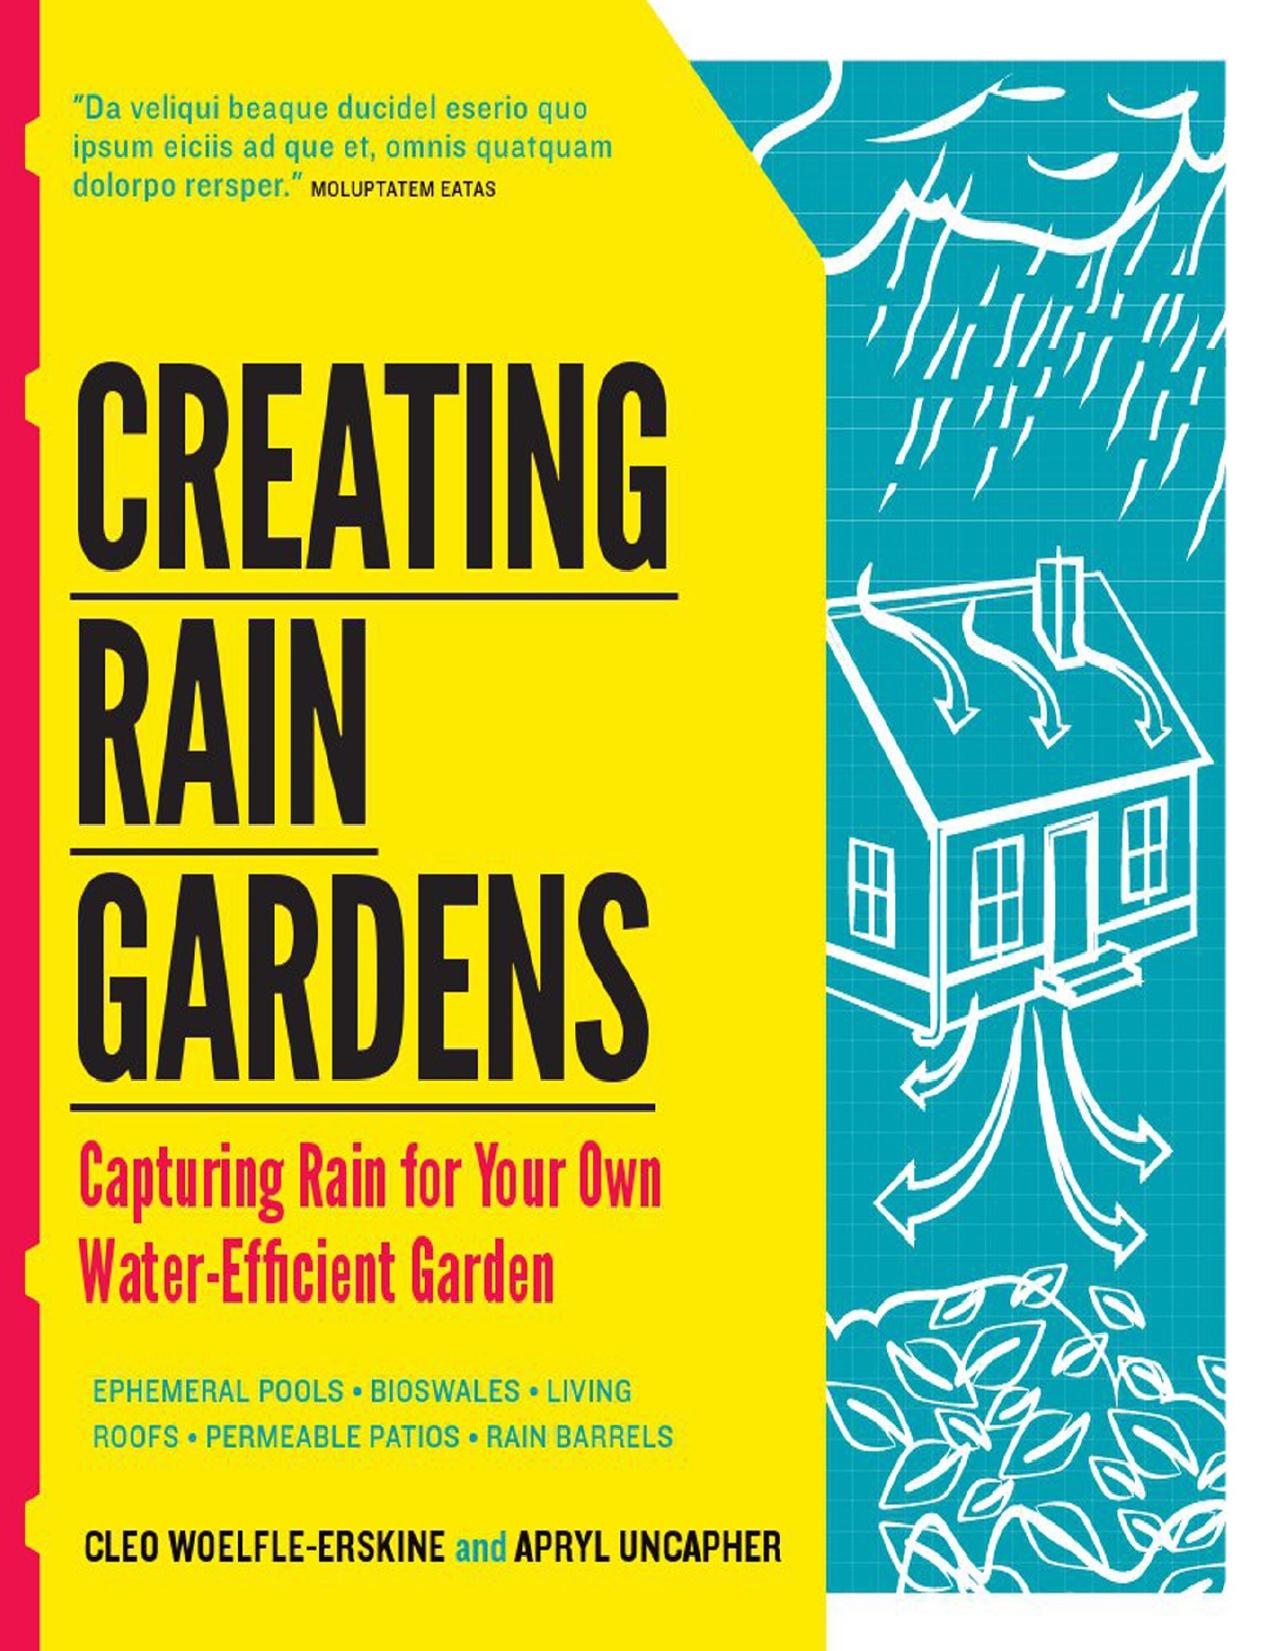 Creating rain gardens: capturing the rain for your own water-efficient garden - PDFDrive.com